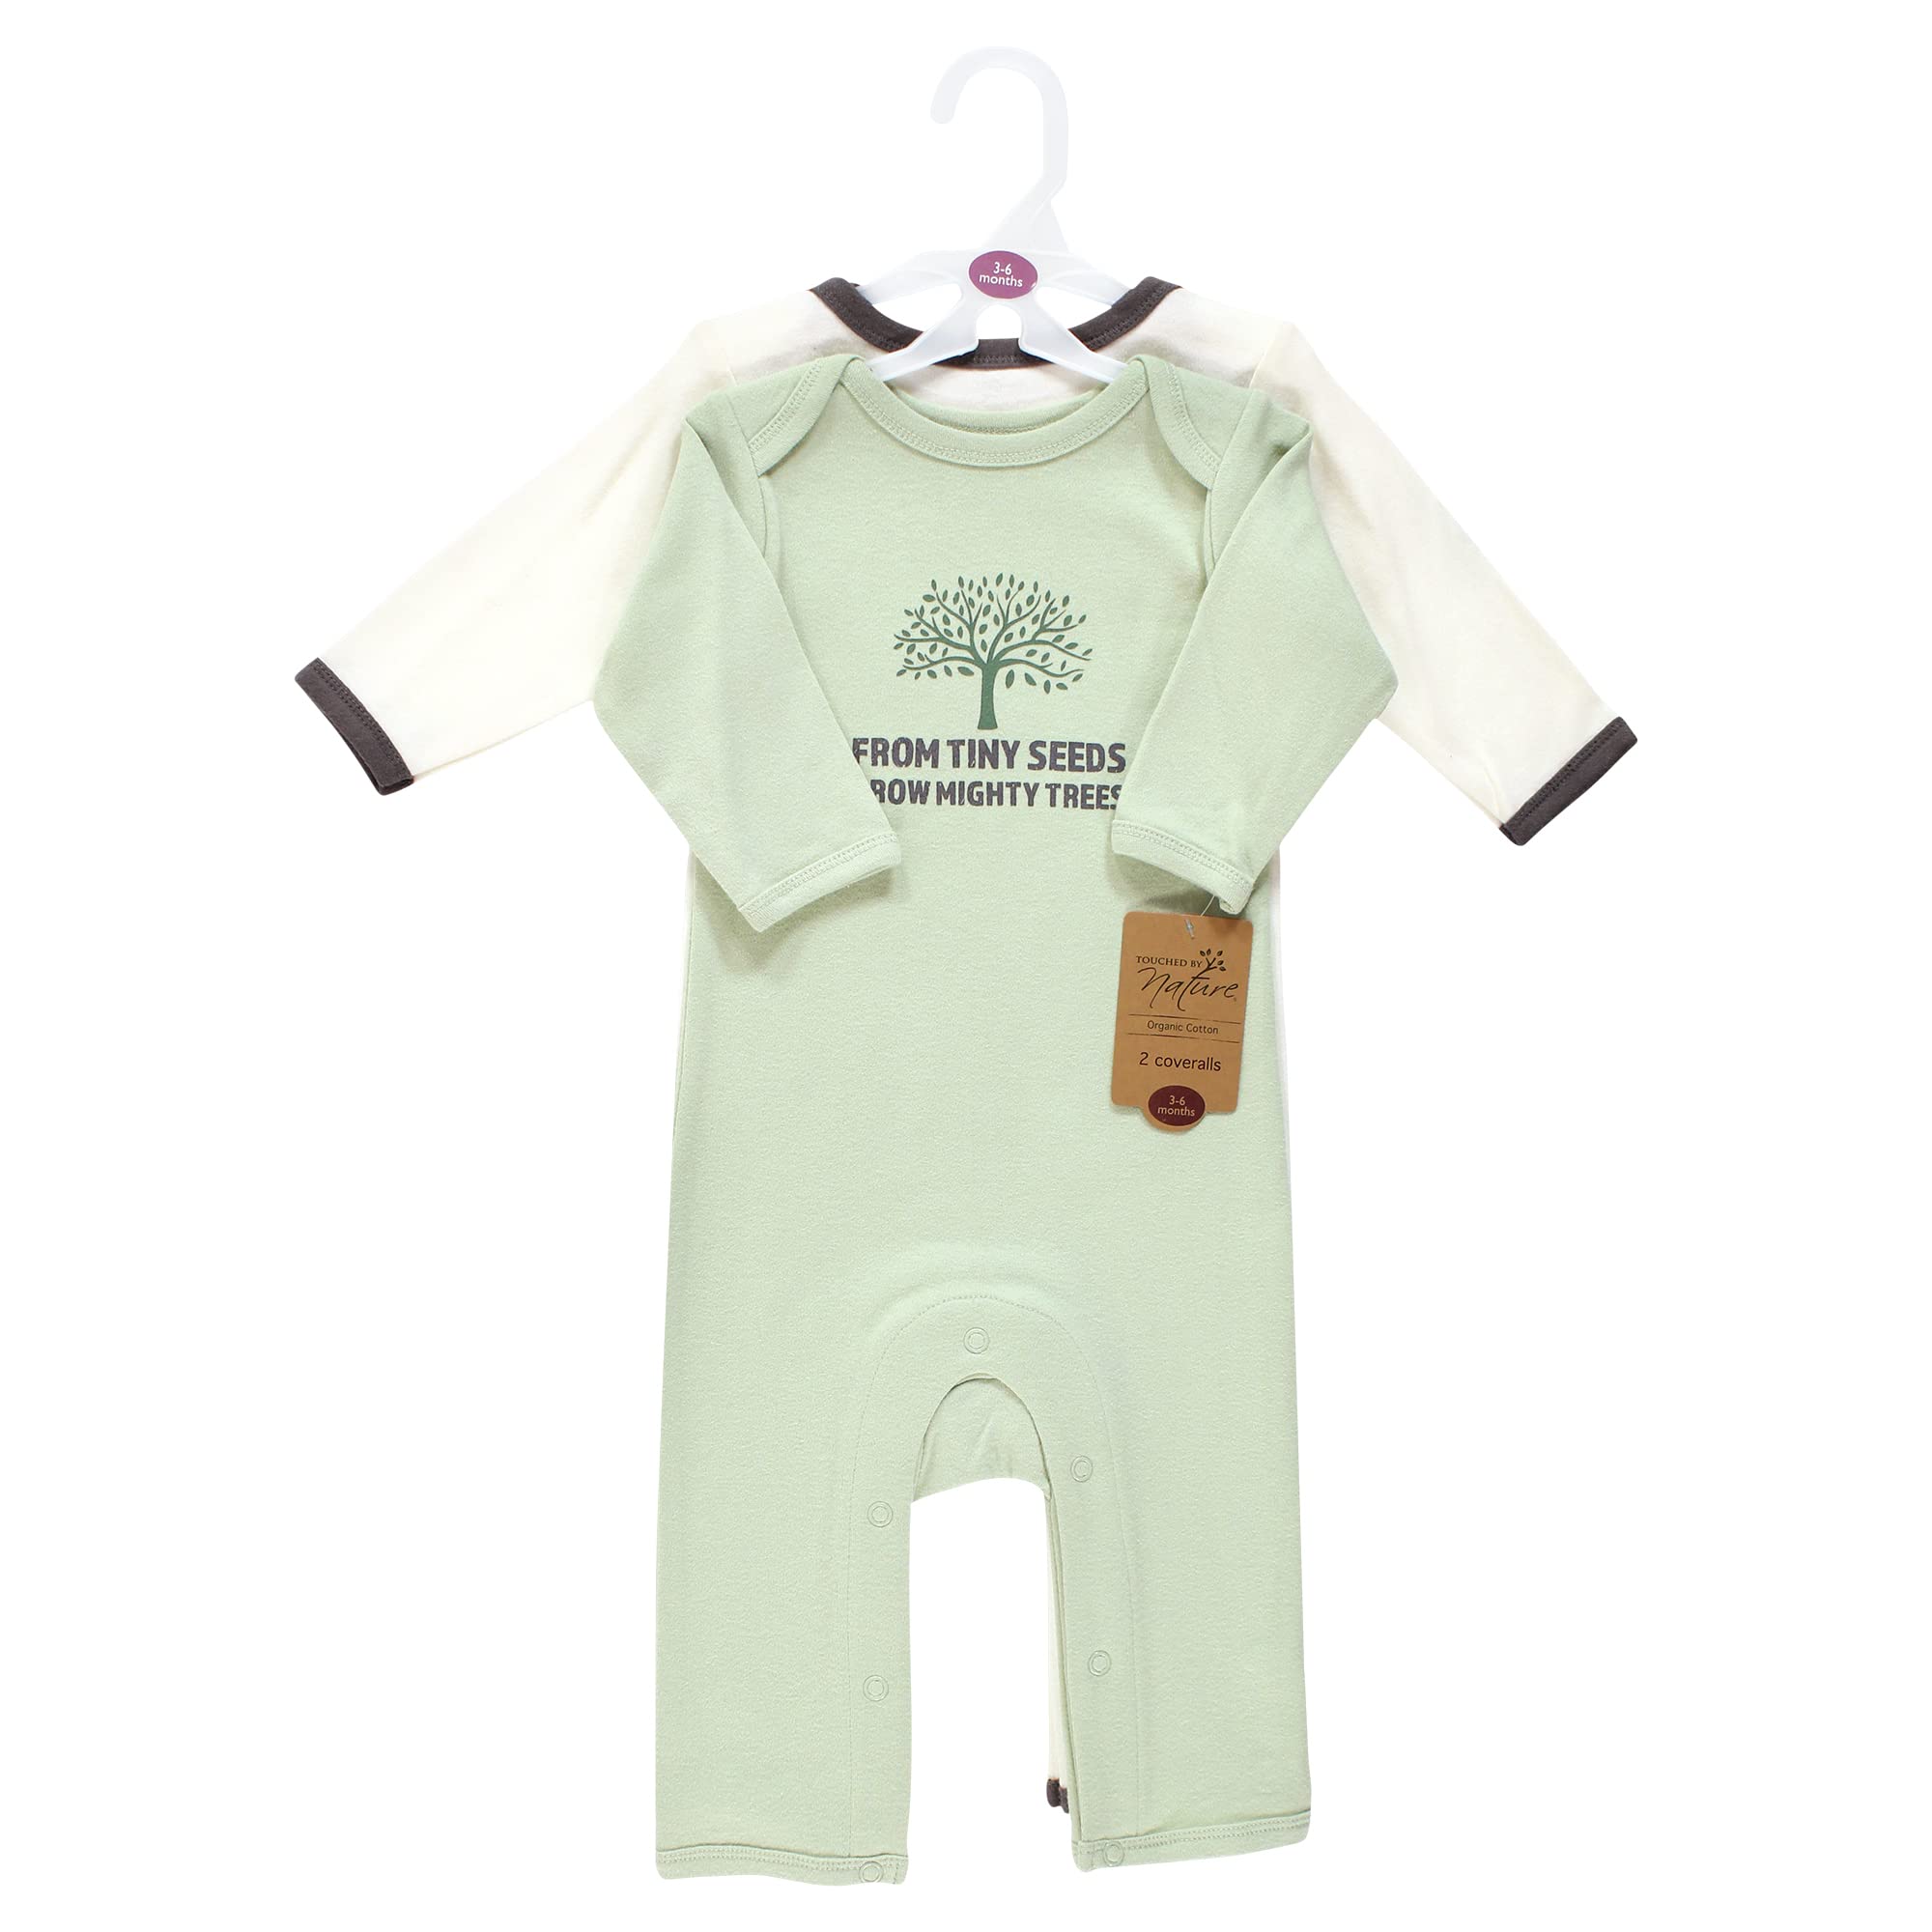 Touched by Nature Unisex Baby Organic Cotton Coveralls, Bee Different, 0-3 Months